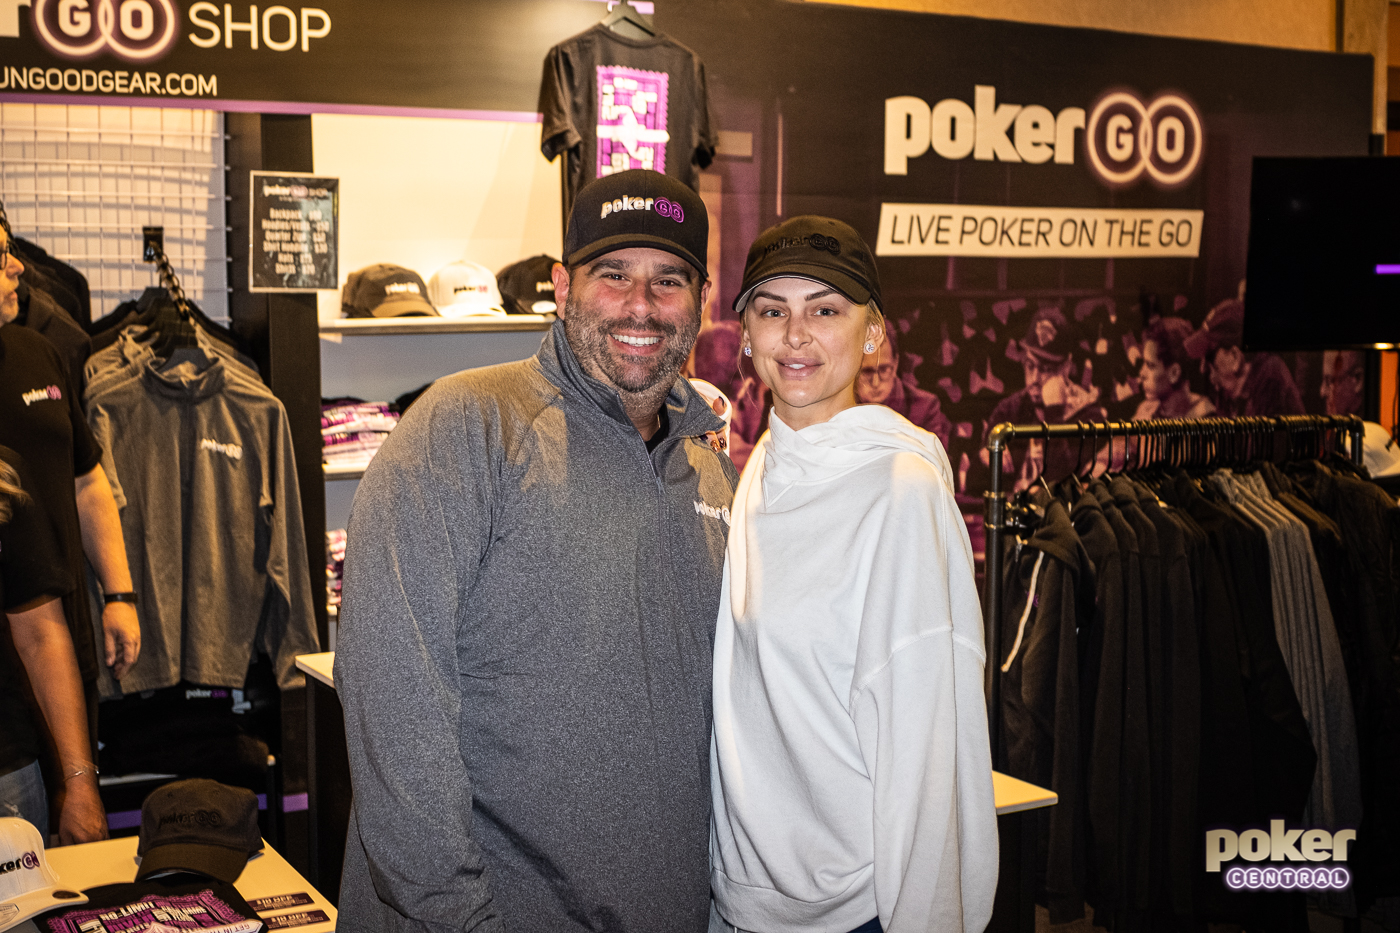 Randall Emmett and his fiancé Lala Kent at the PokerGO Meet & Greet at the 2019 World Series of Poker.